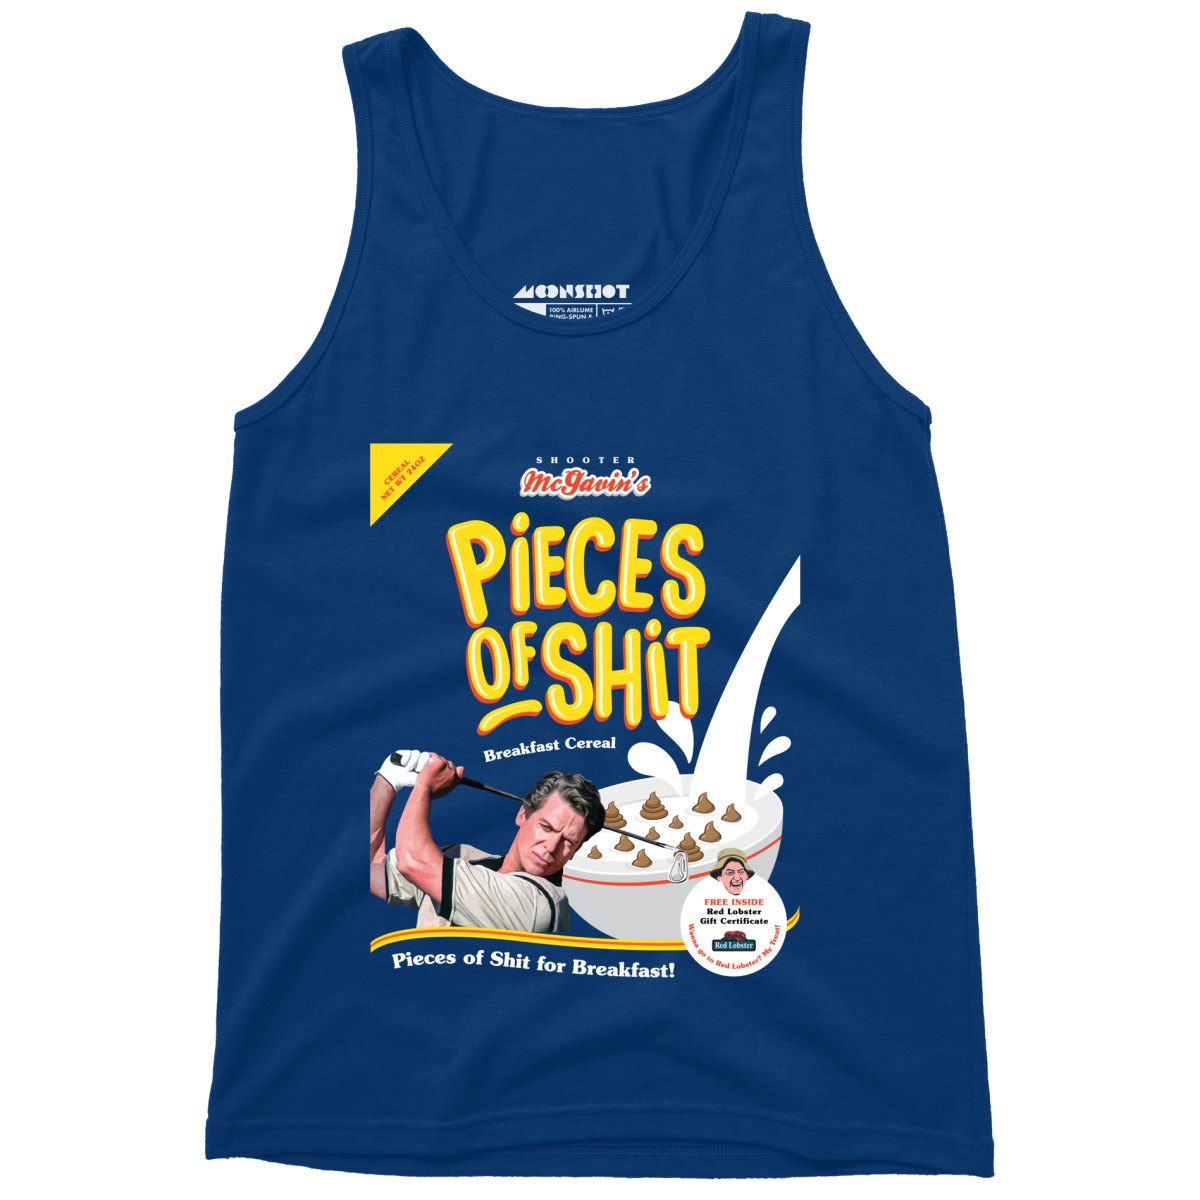 Shooter McGavin's Pieces of Shit Breakfast Cereal - Unisex Tank Top